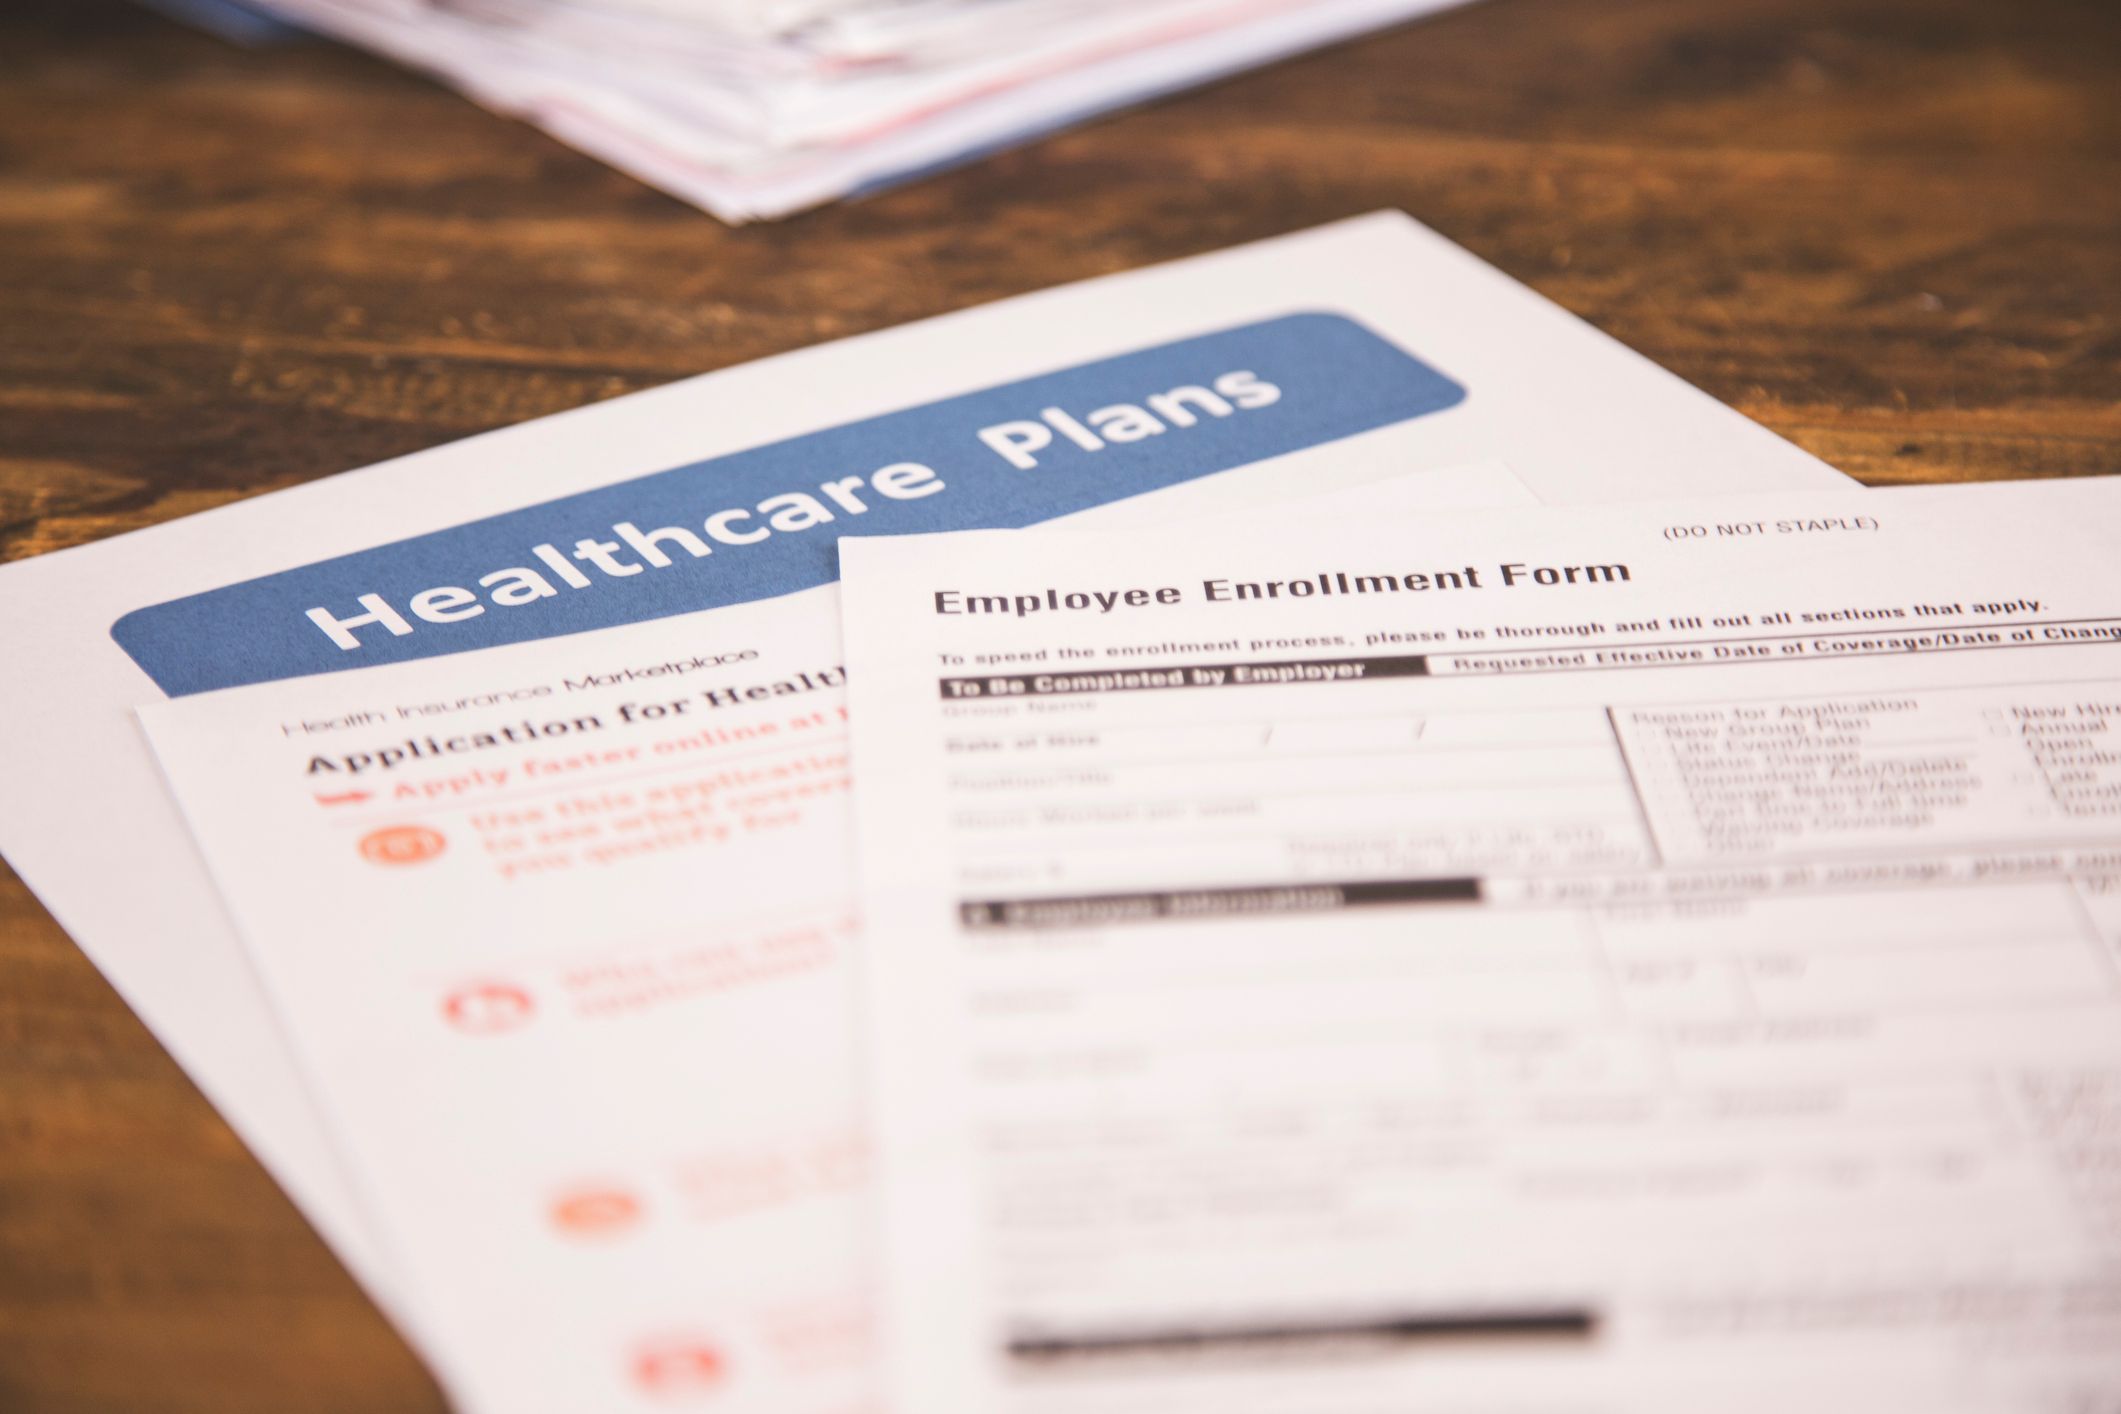 Open Enrollment: What People With Employer-Provided Insurance Need to Know